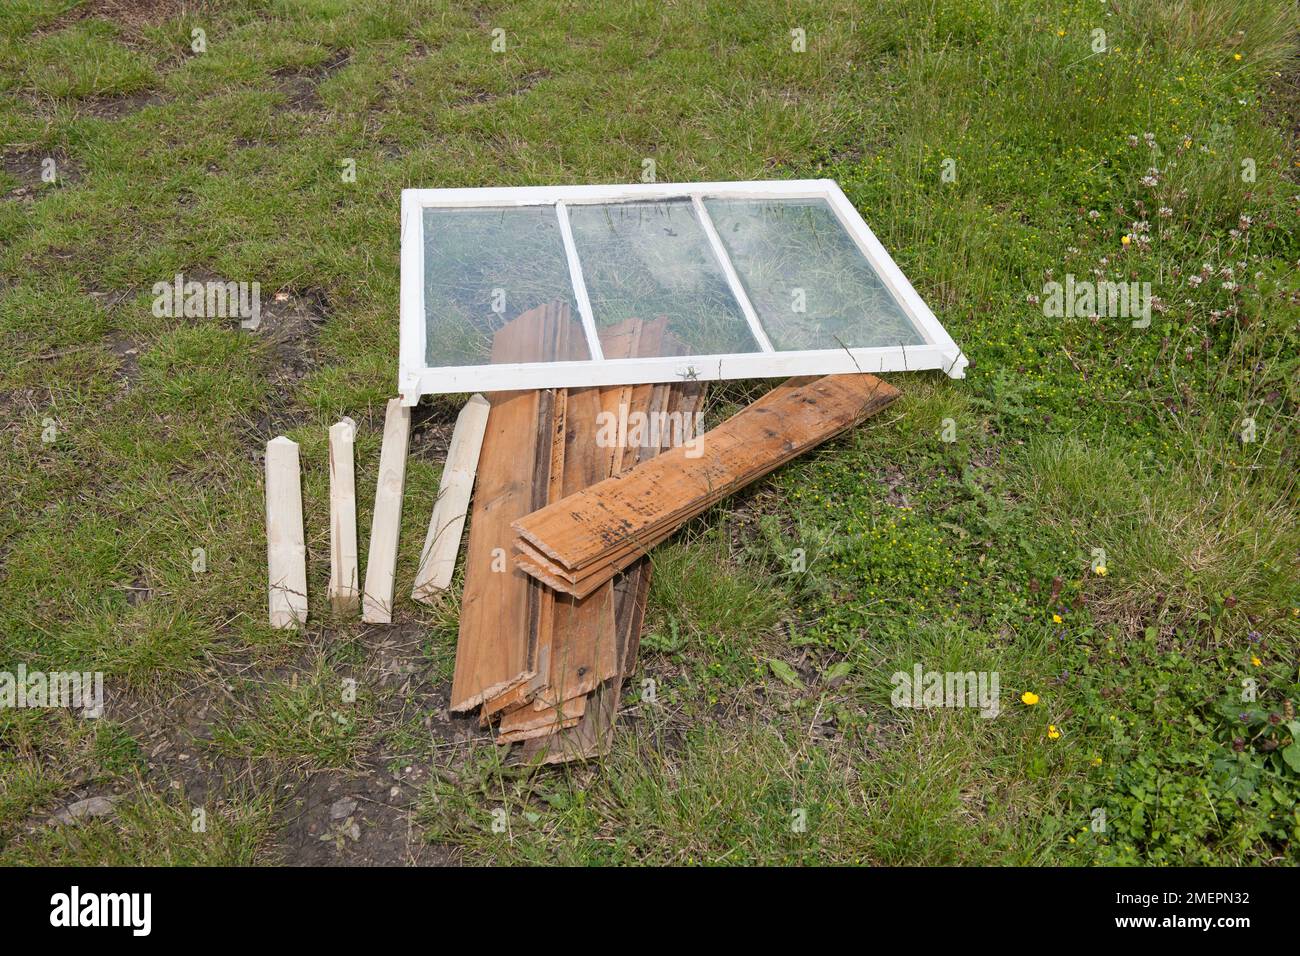 Recycled planks of wood and window, materials for constructing cold frame Stock Photo